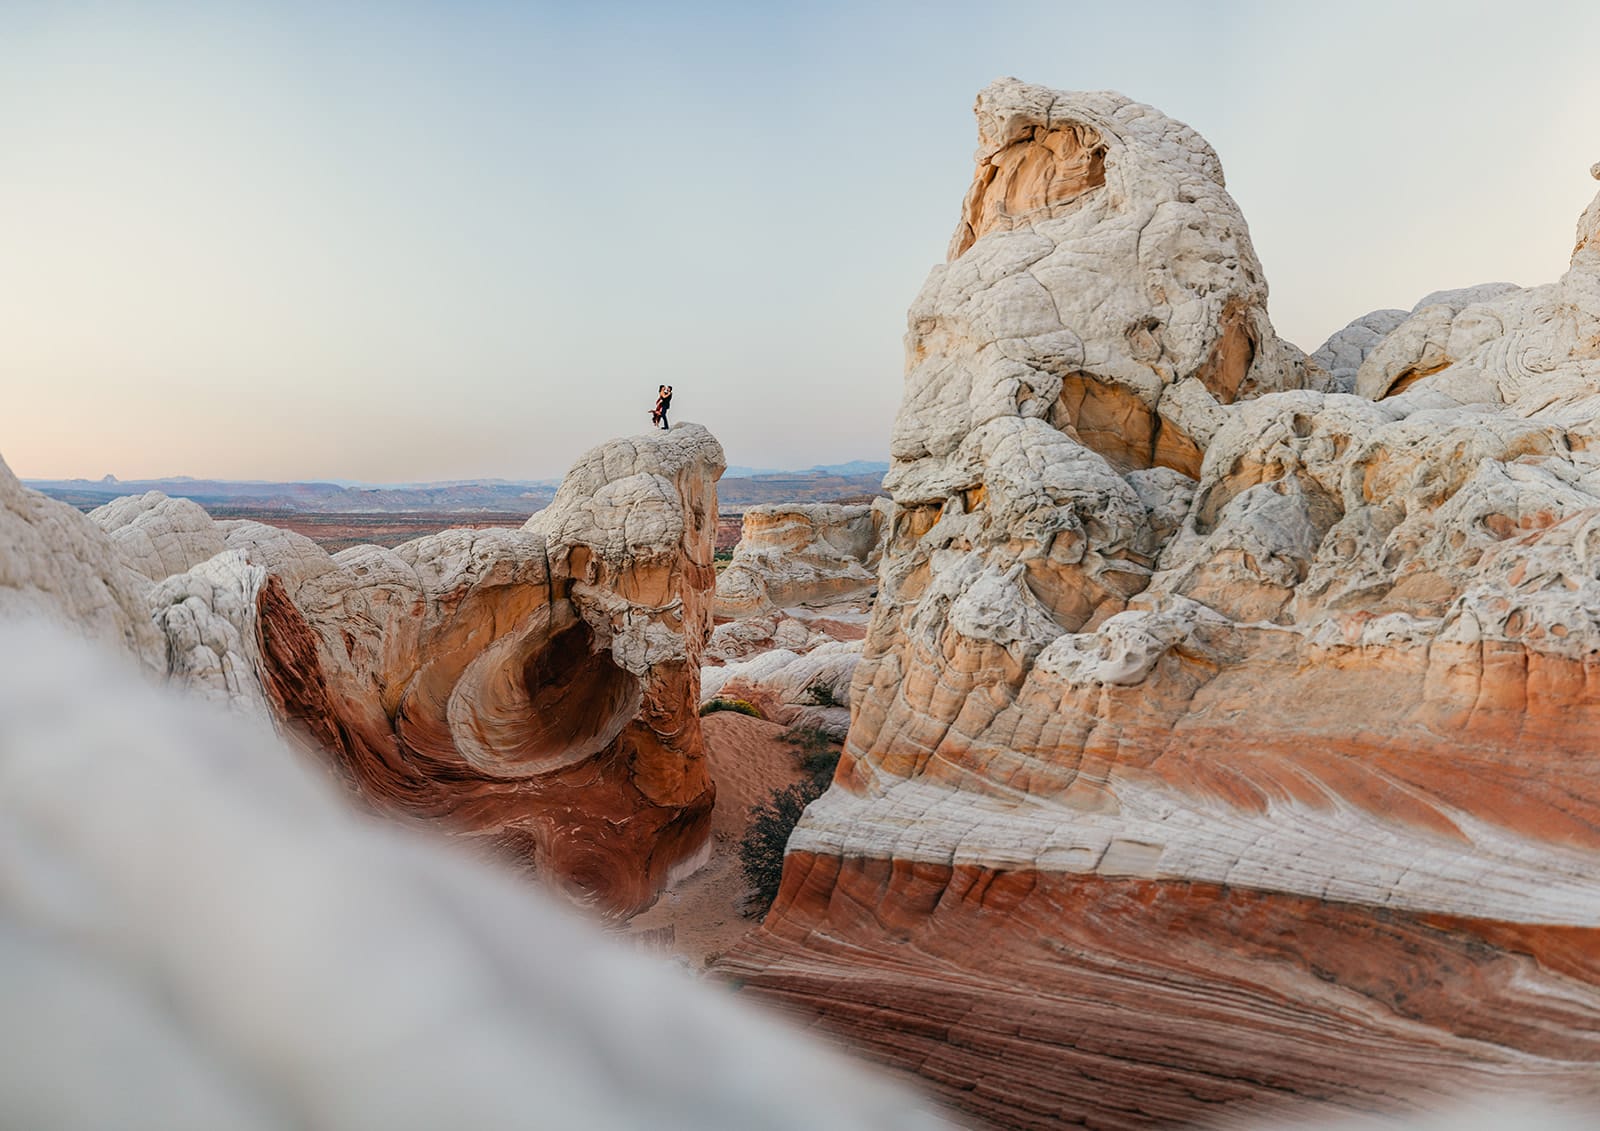 A couple stands on top of a beautiful rock formation at dusk.